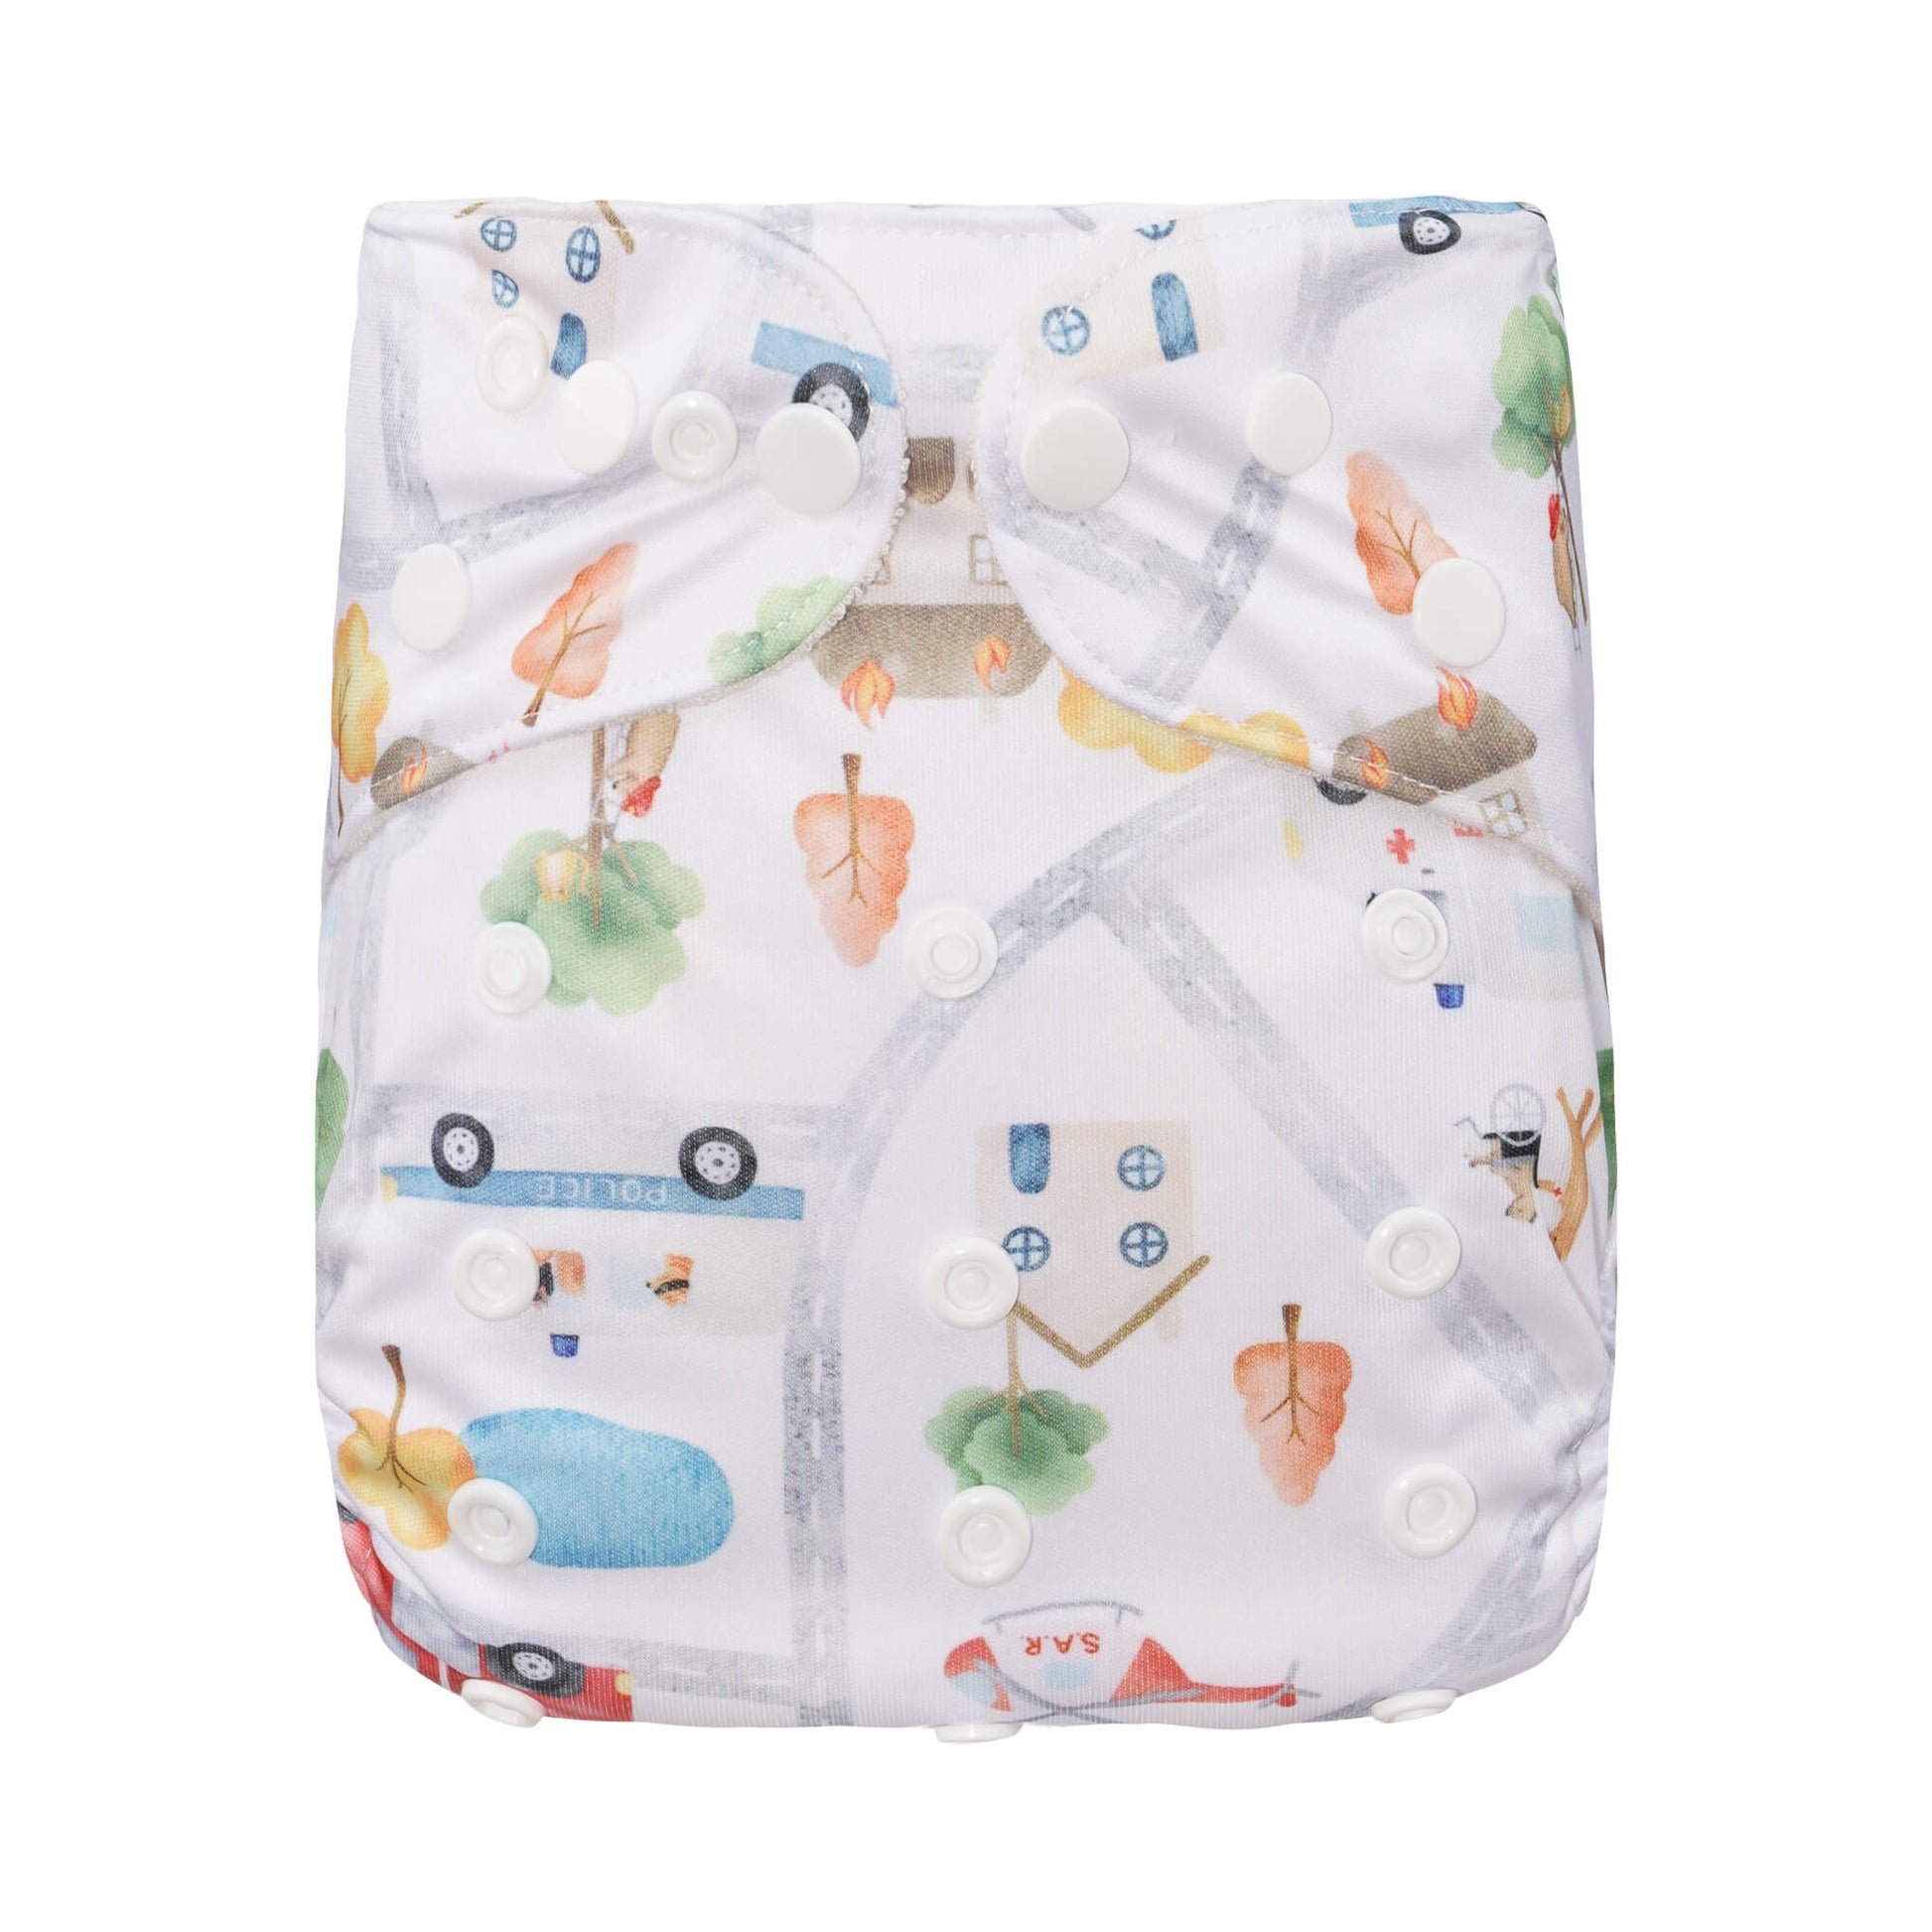 Bear & Moo One Size Fits Most Reusable Cloth Nappy in Emergency Village